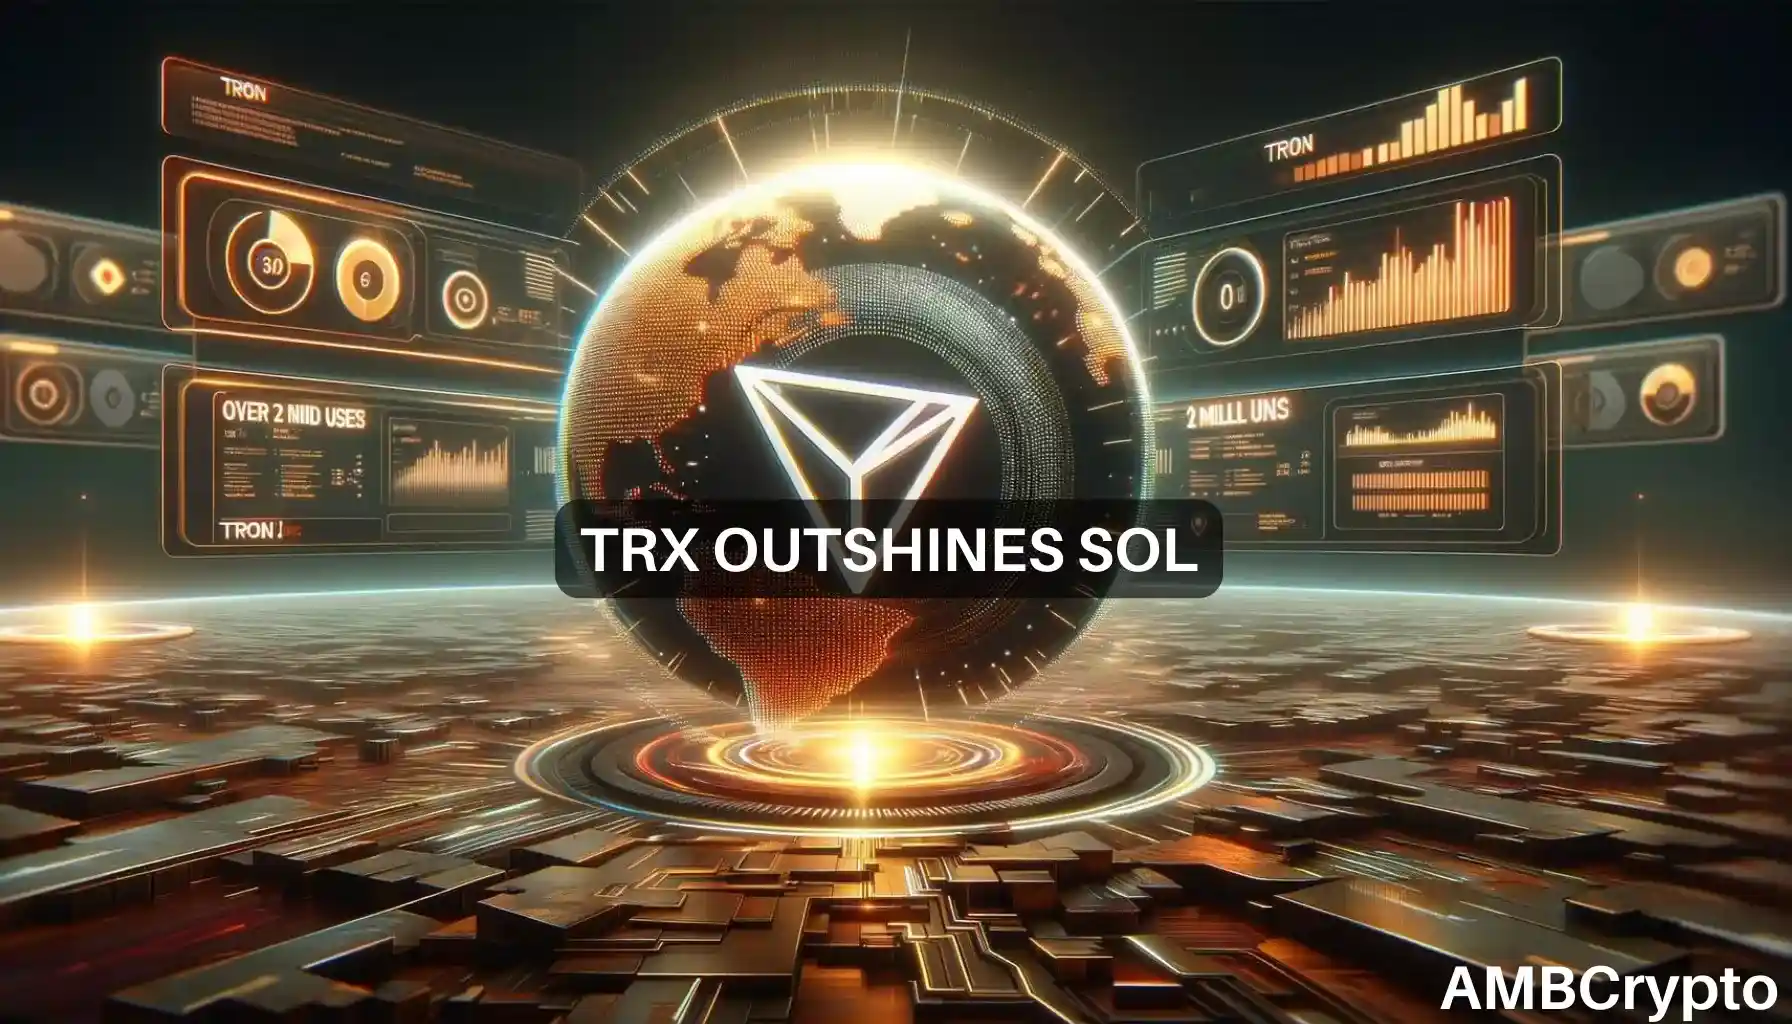 Tron vs Solana: How TRX’s 2M daily user stack up against SOL